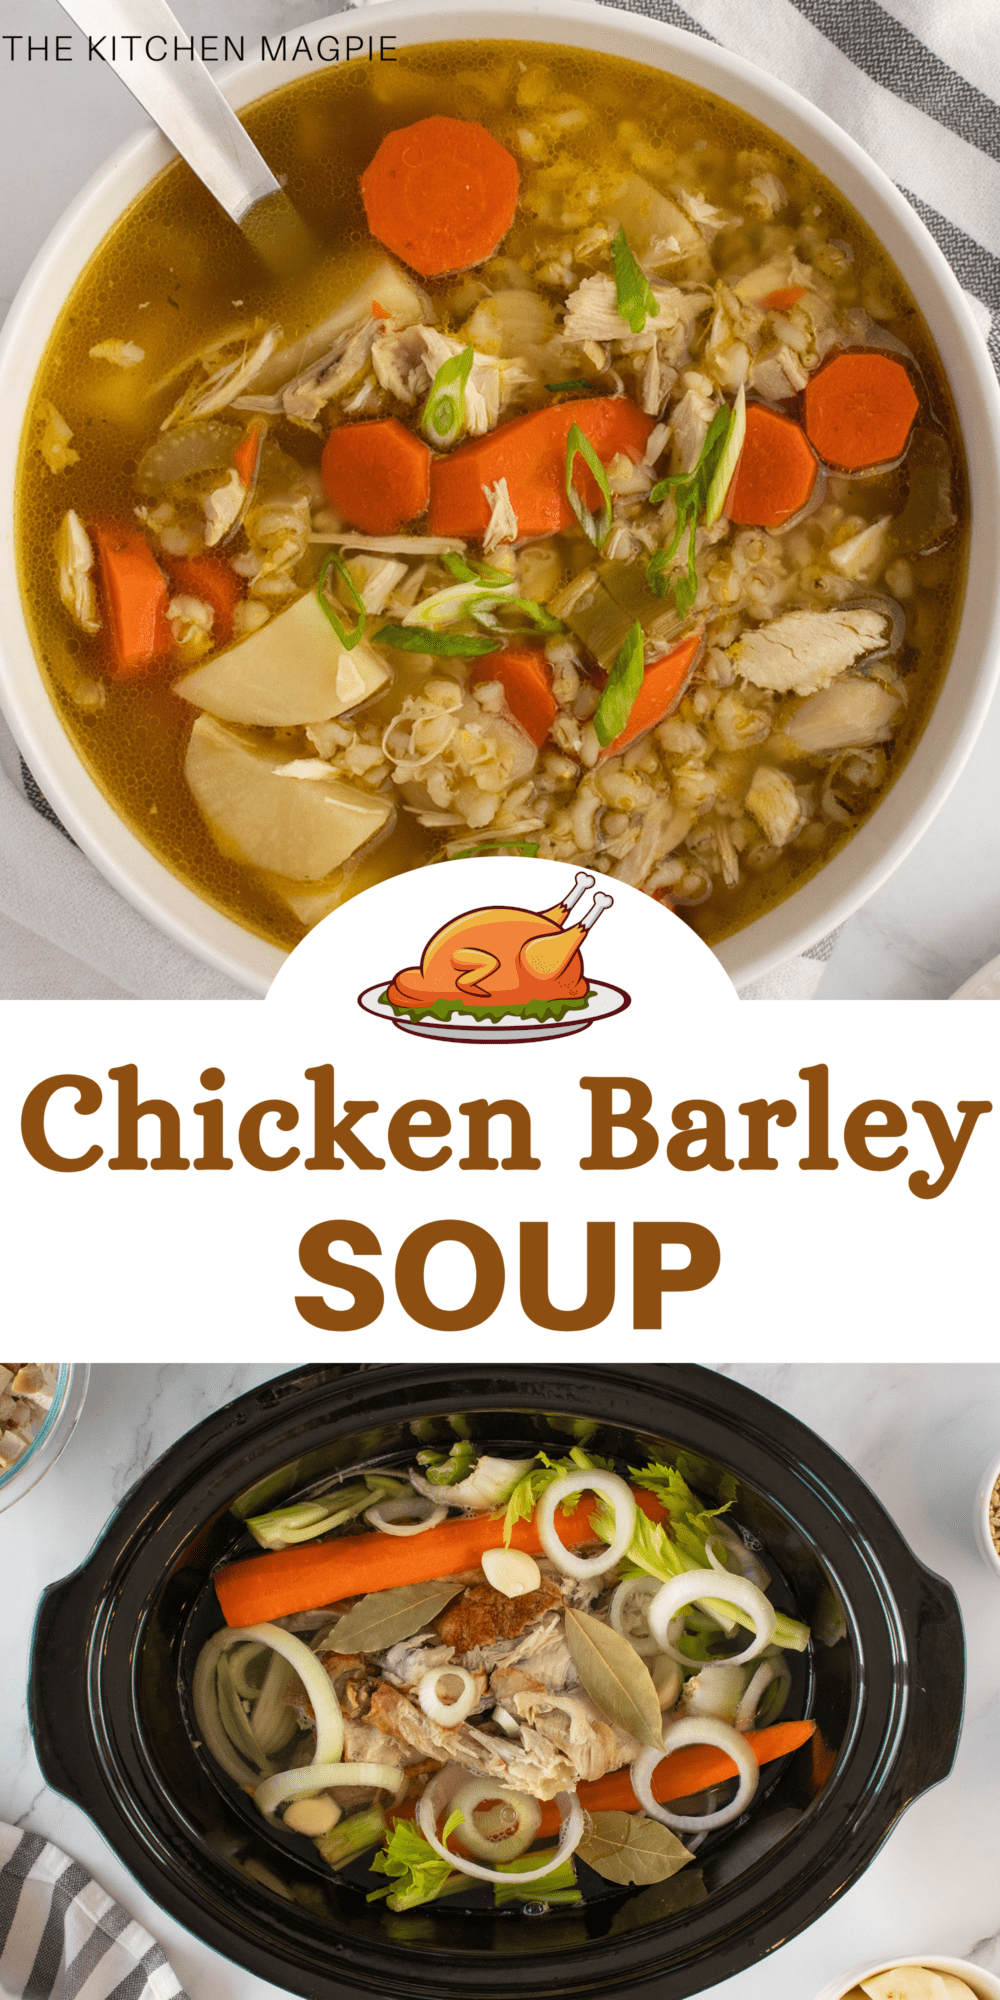 Chicken barley soup made with your roast chicken leftovers. By the time you are done cleaning up after your roast chicken dinner, you will have prepped TOMORROWS dinner as well